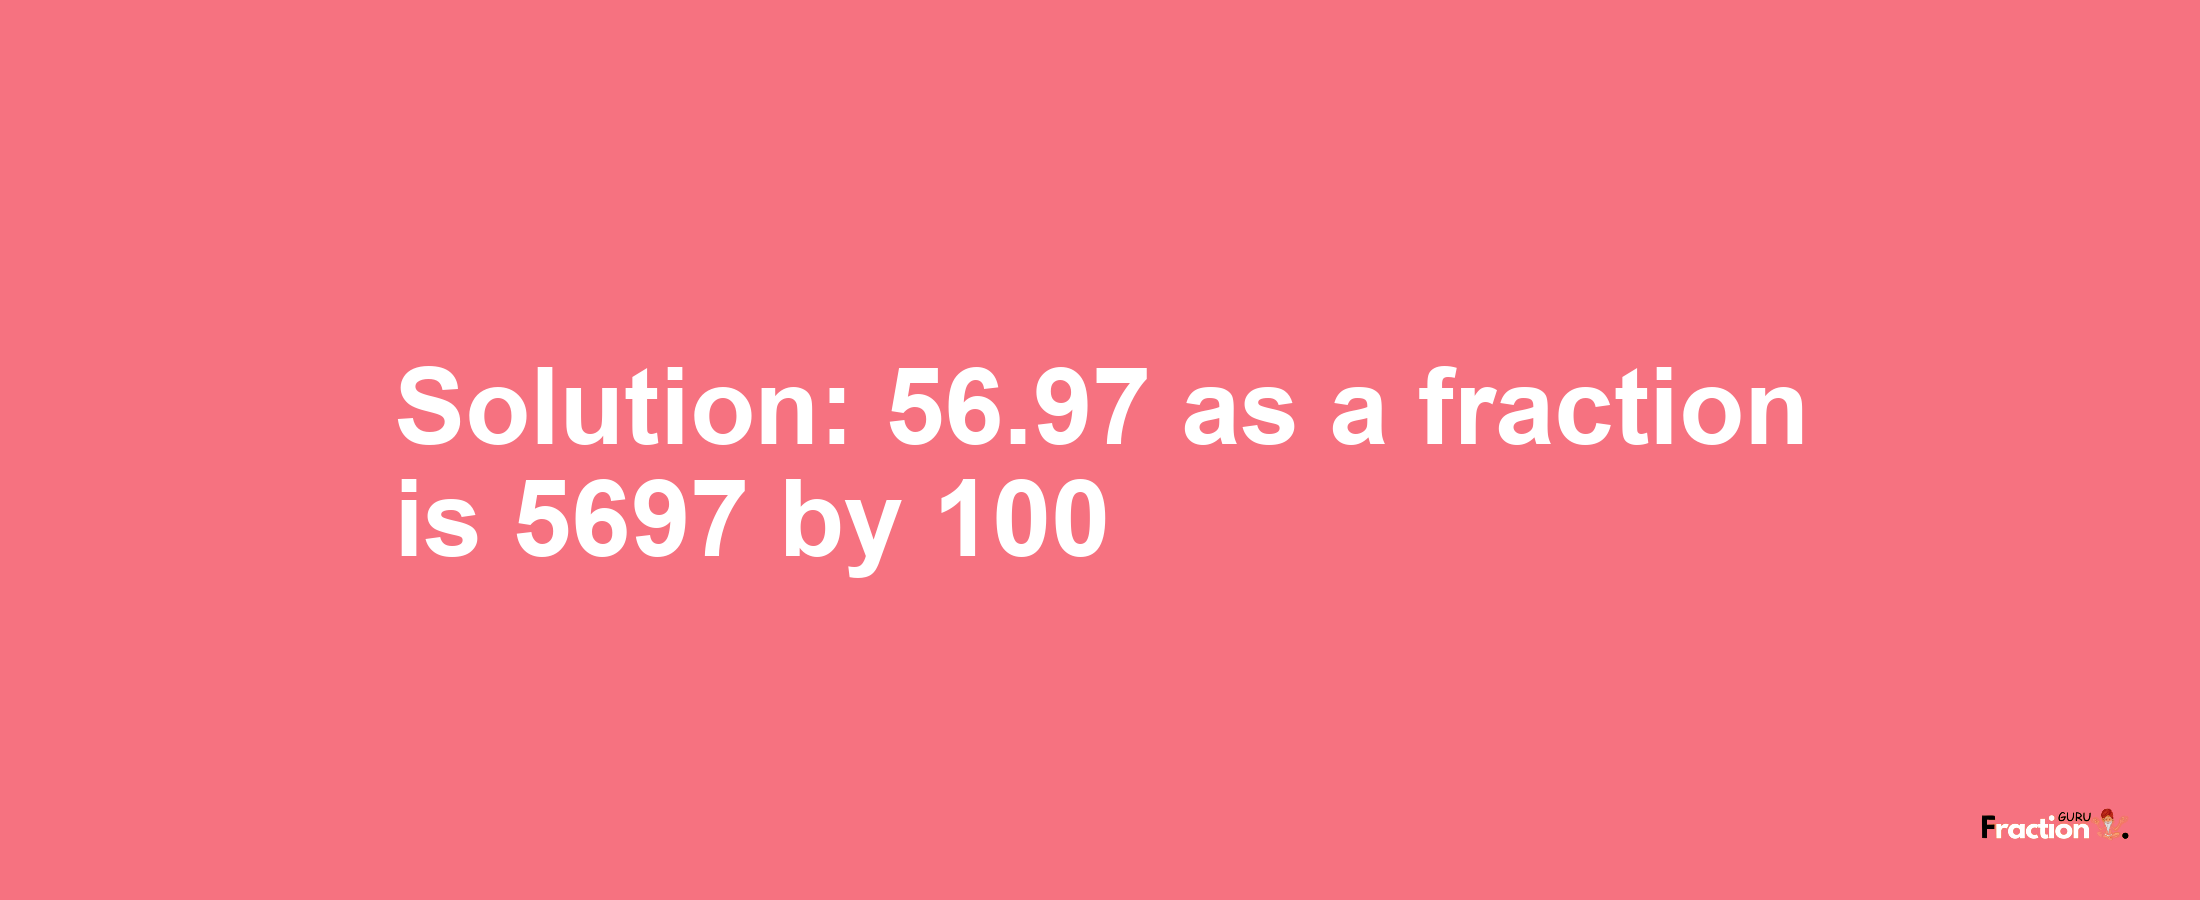 Solution:56.97 as a fraction is 5697/100